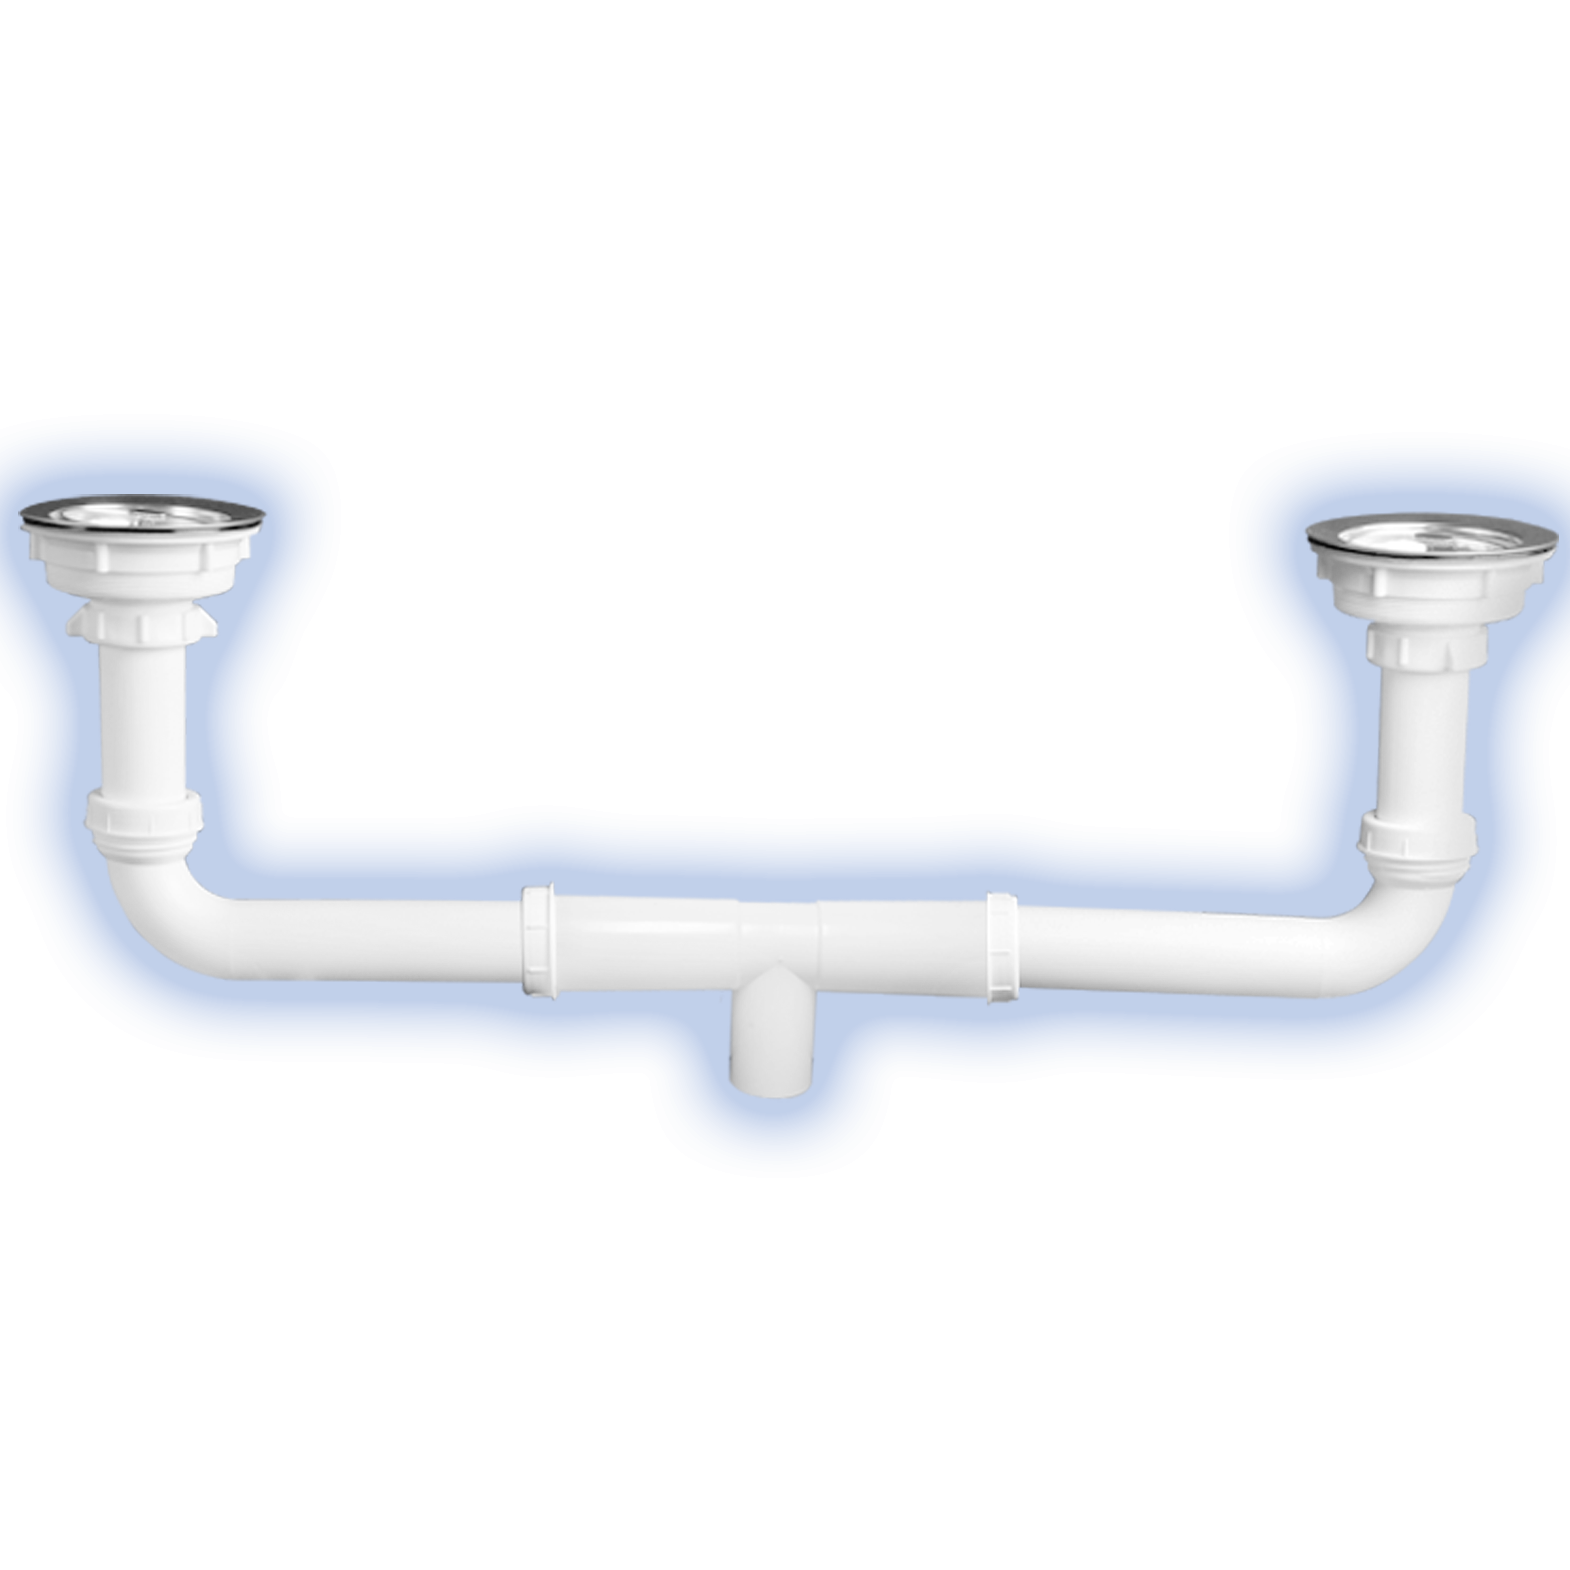 RIGID STANDARD (AMERICAN) DRAIN WITH TWO COMBINED SINK STRAINERS.